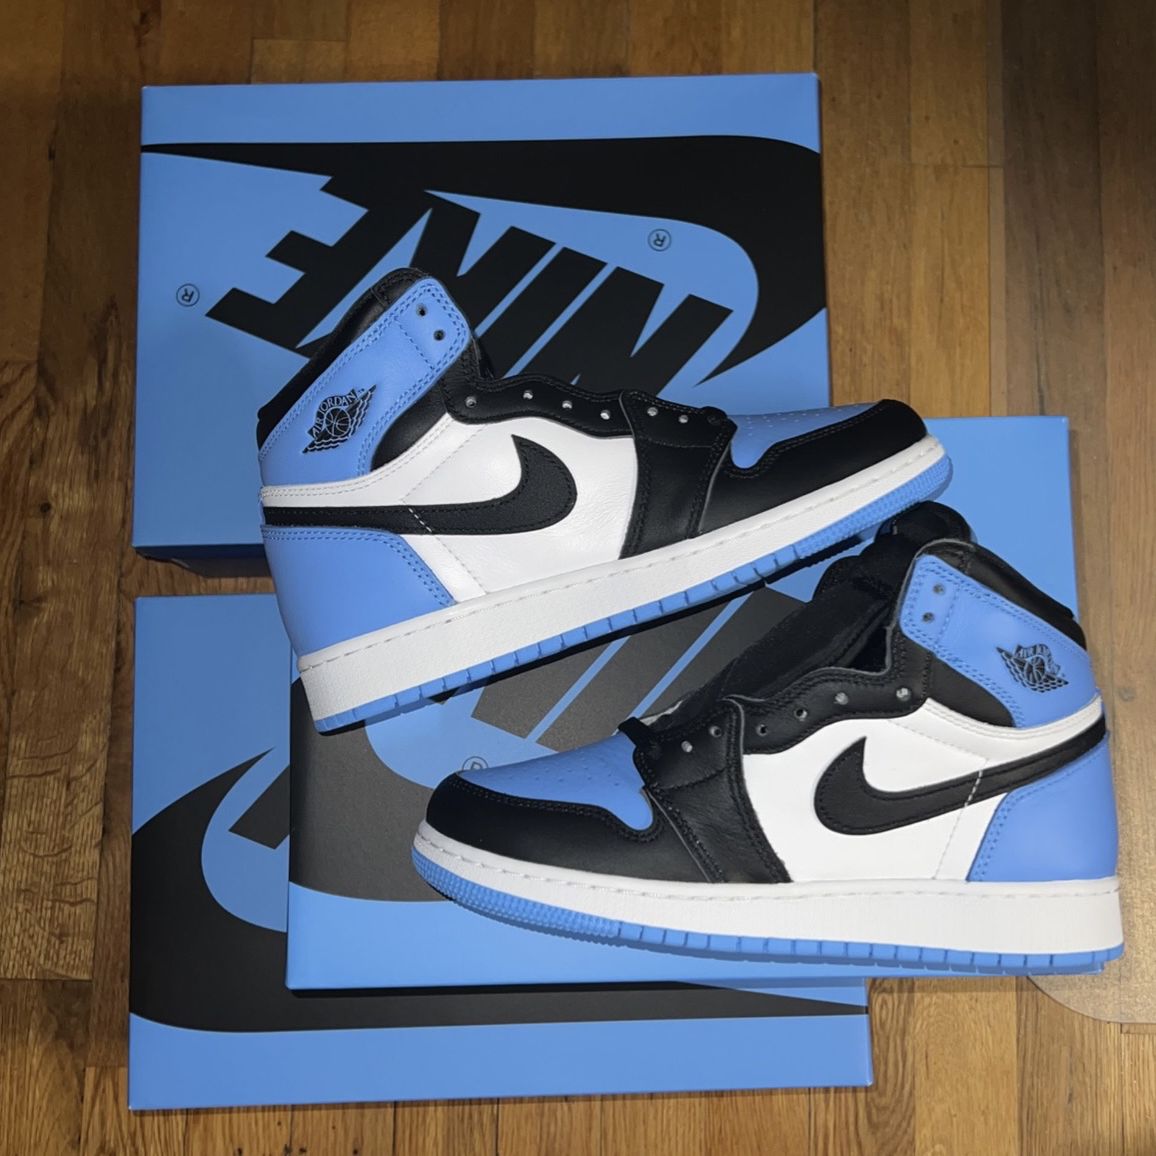 Jordan's 1s “Off White UNC” Size 9.5 & 11 Brand New for Sale in Queens, NY  - OfferUp